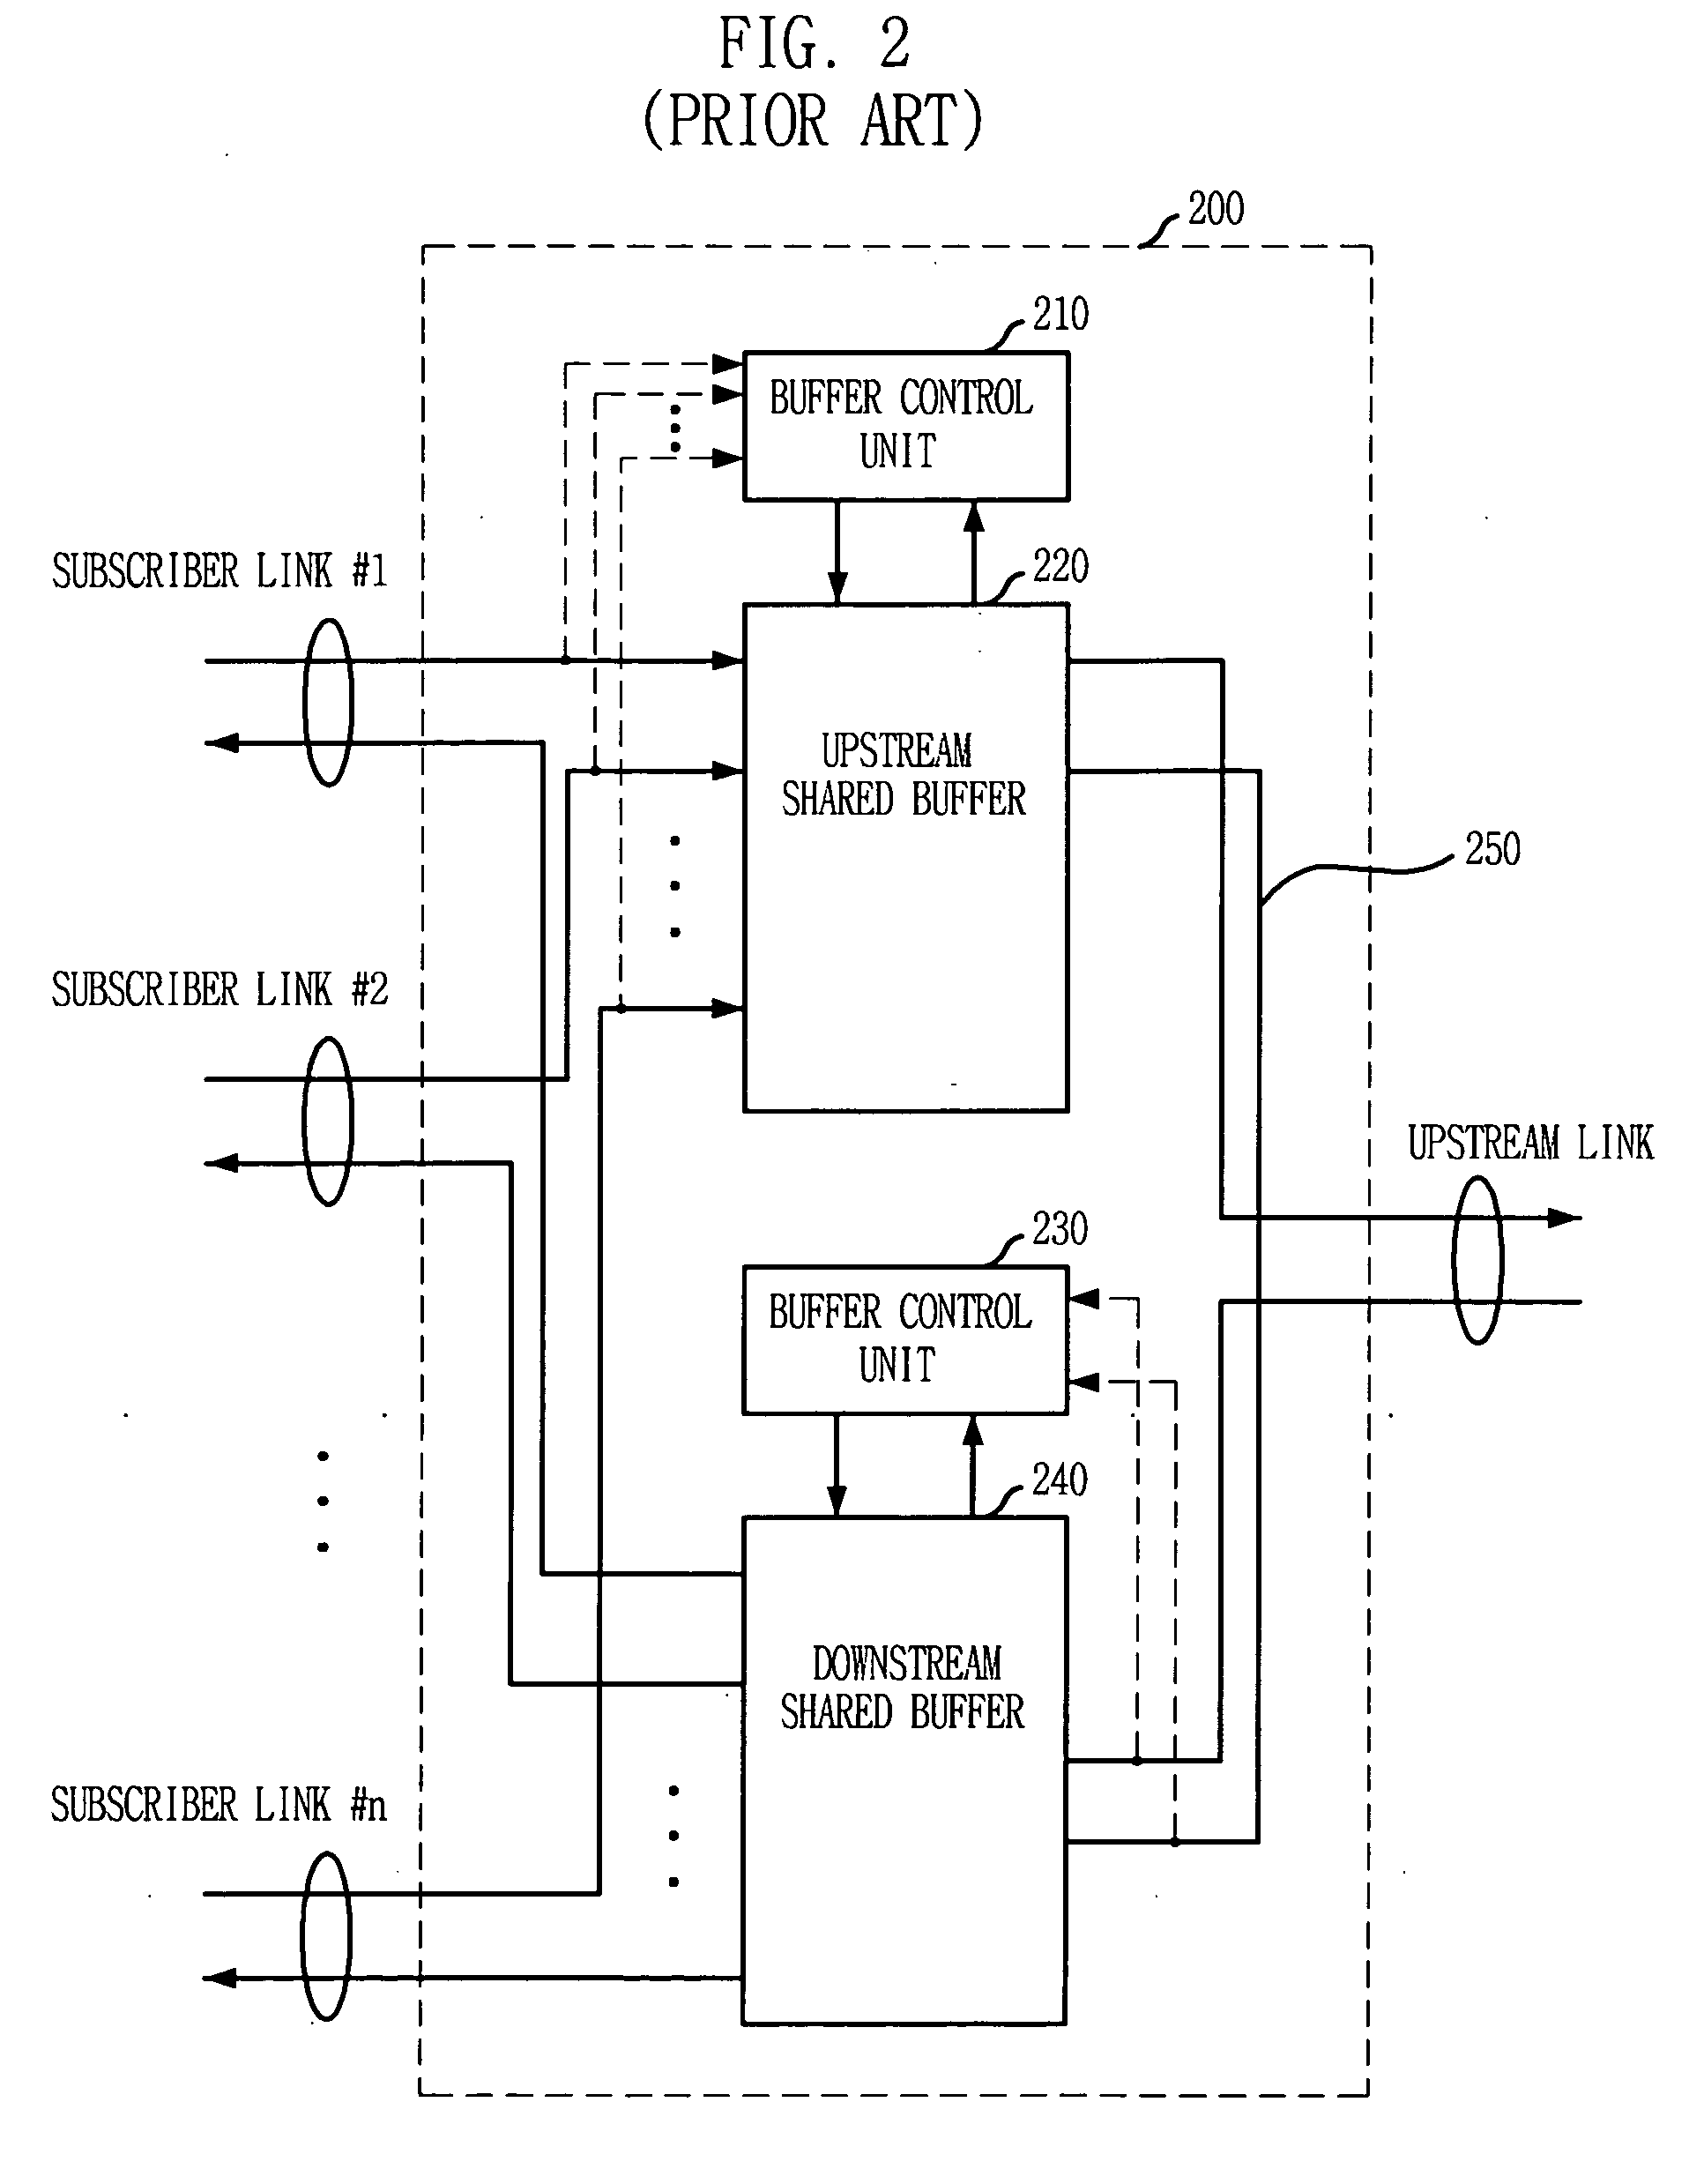 Aggregation switch apparatus for broadband subscribers